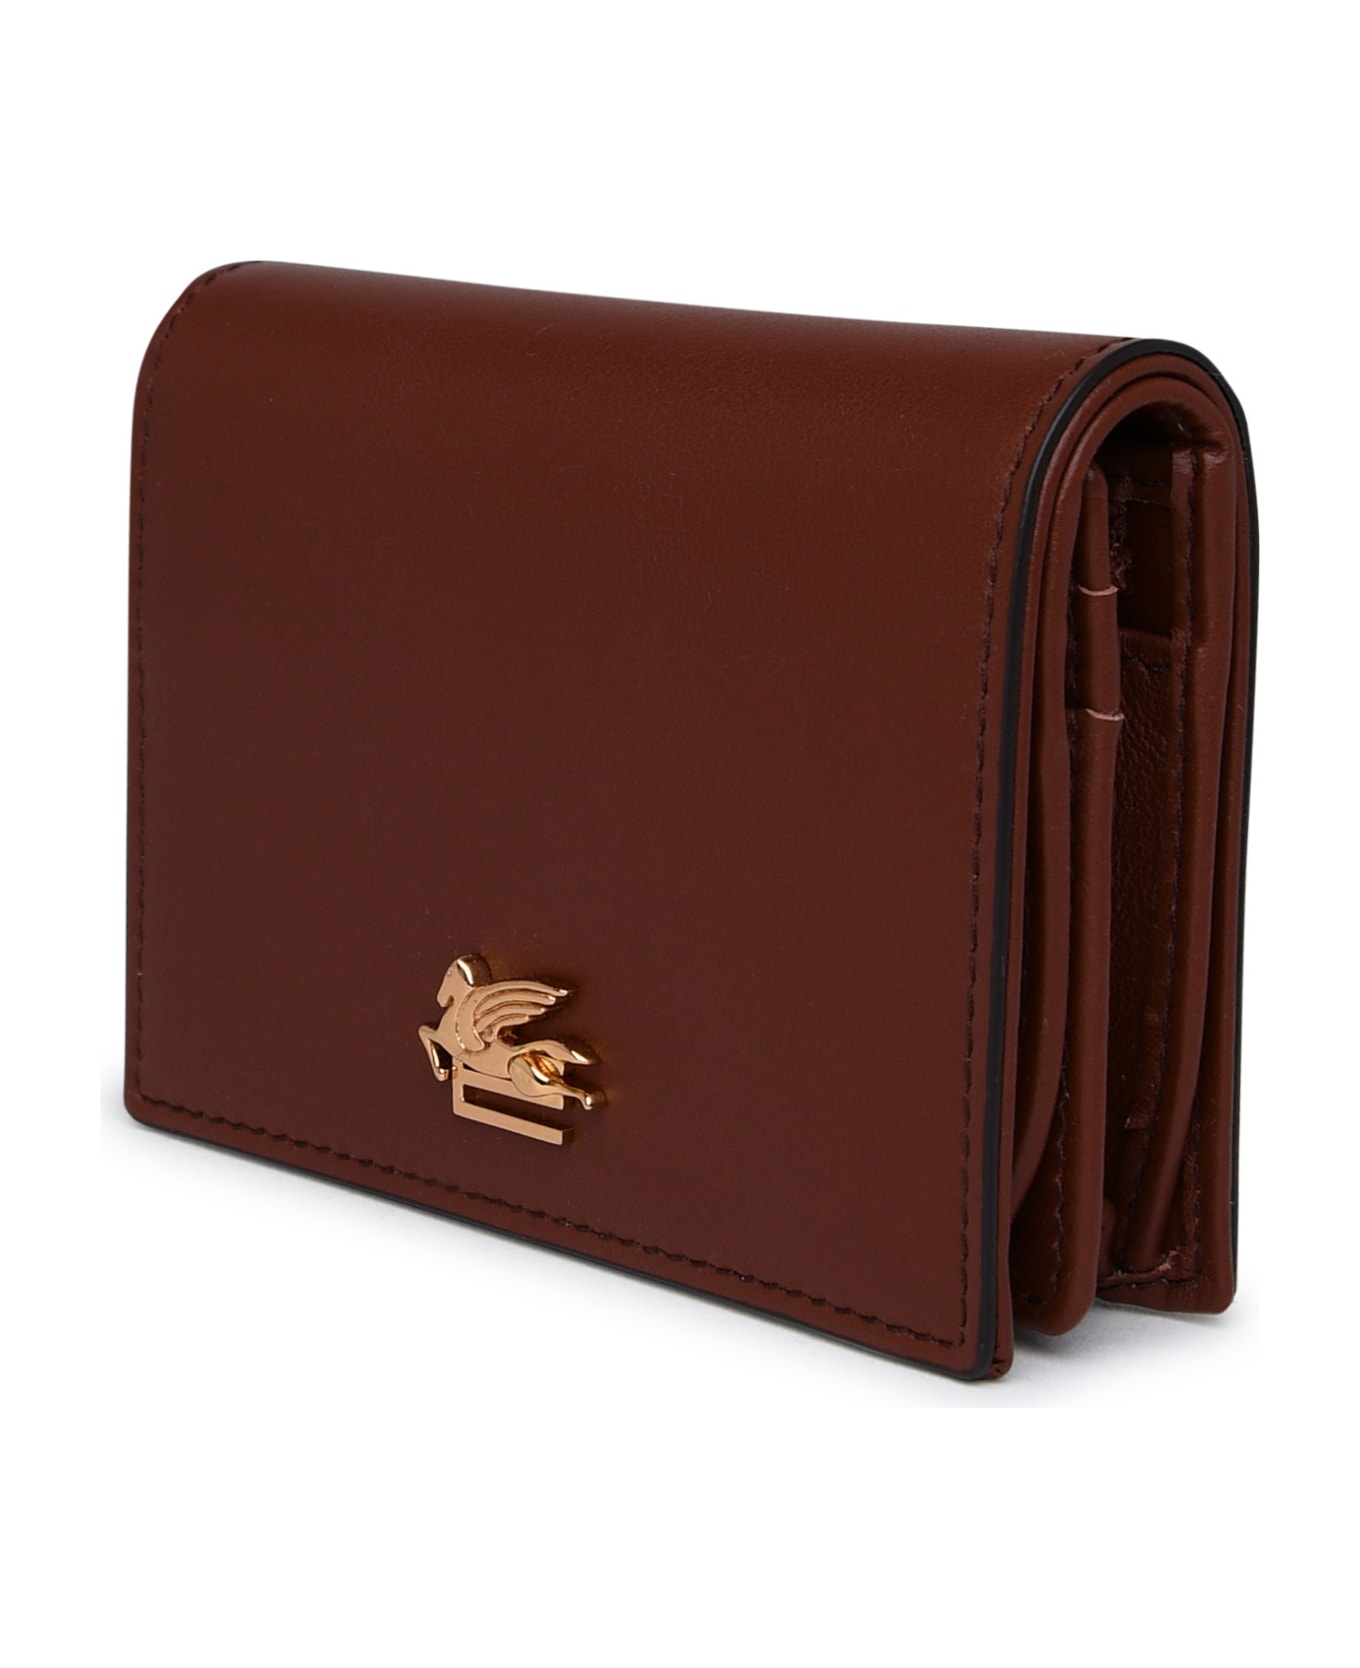 Etro Brown Leather Wallet - Brown